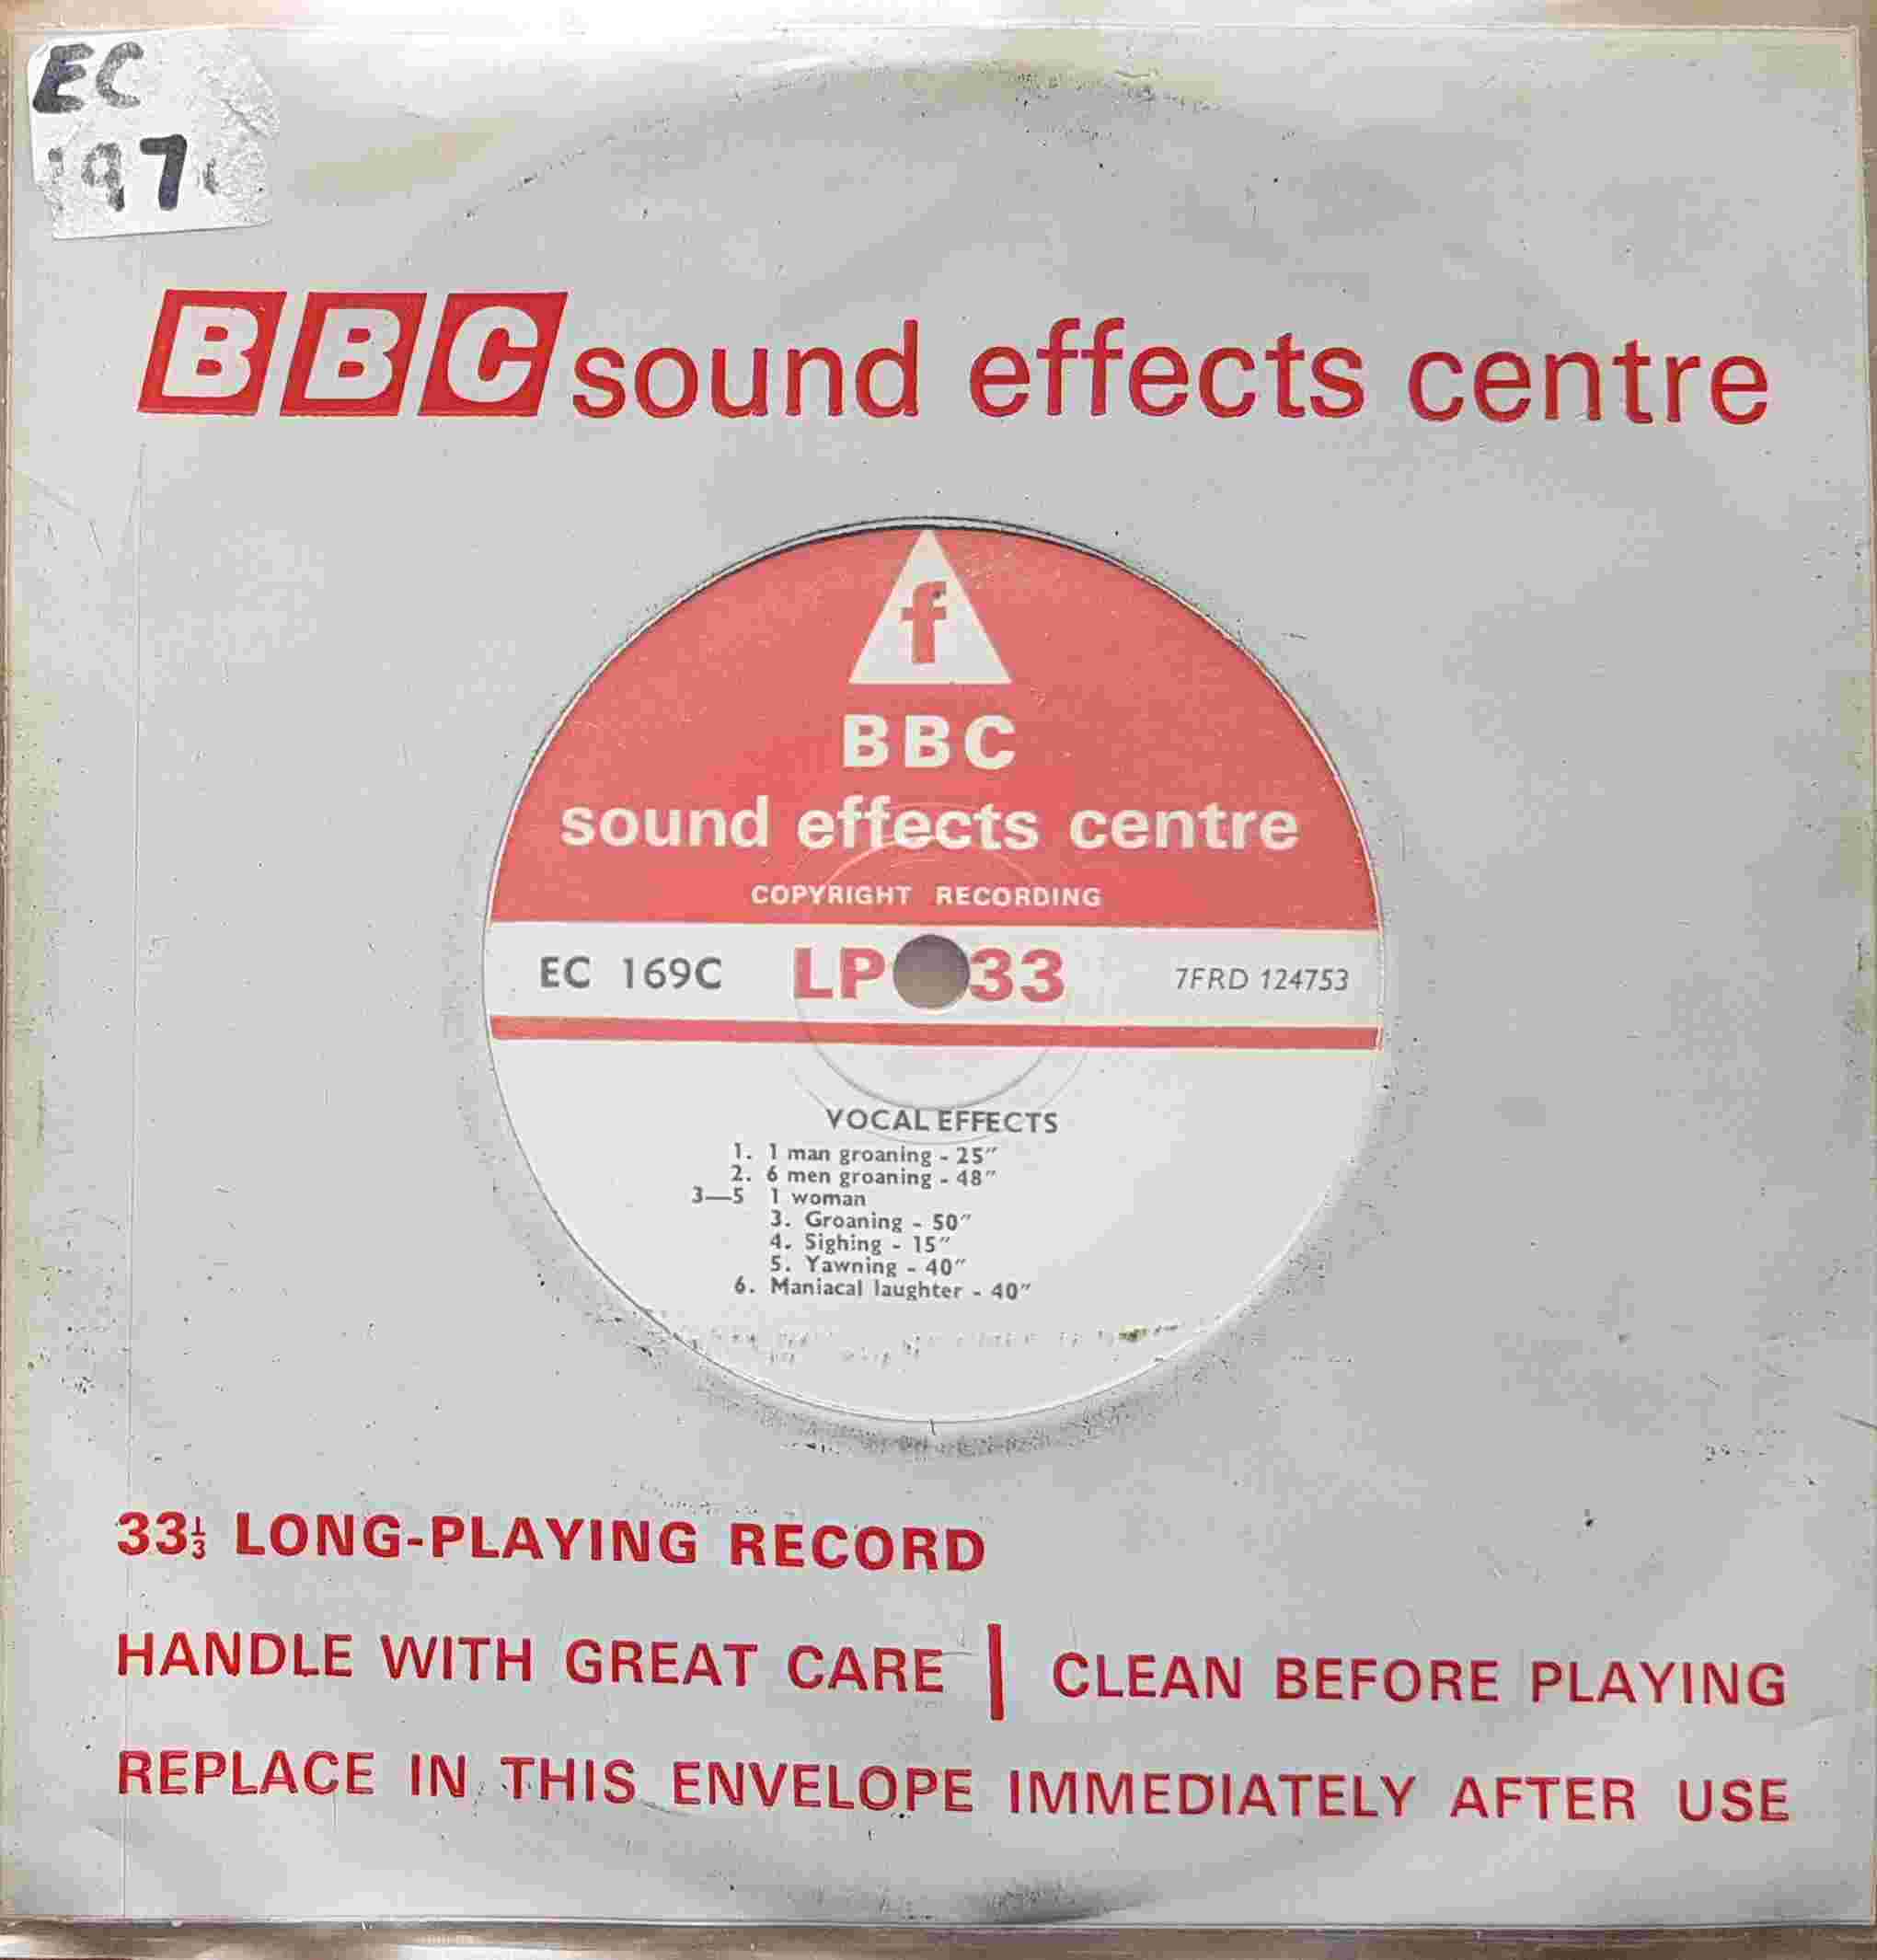 Picture of EC 169C Vocal effects / Vocal & heart effects by artist Not registered from the BBC records and Tapes library